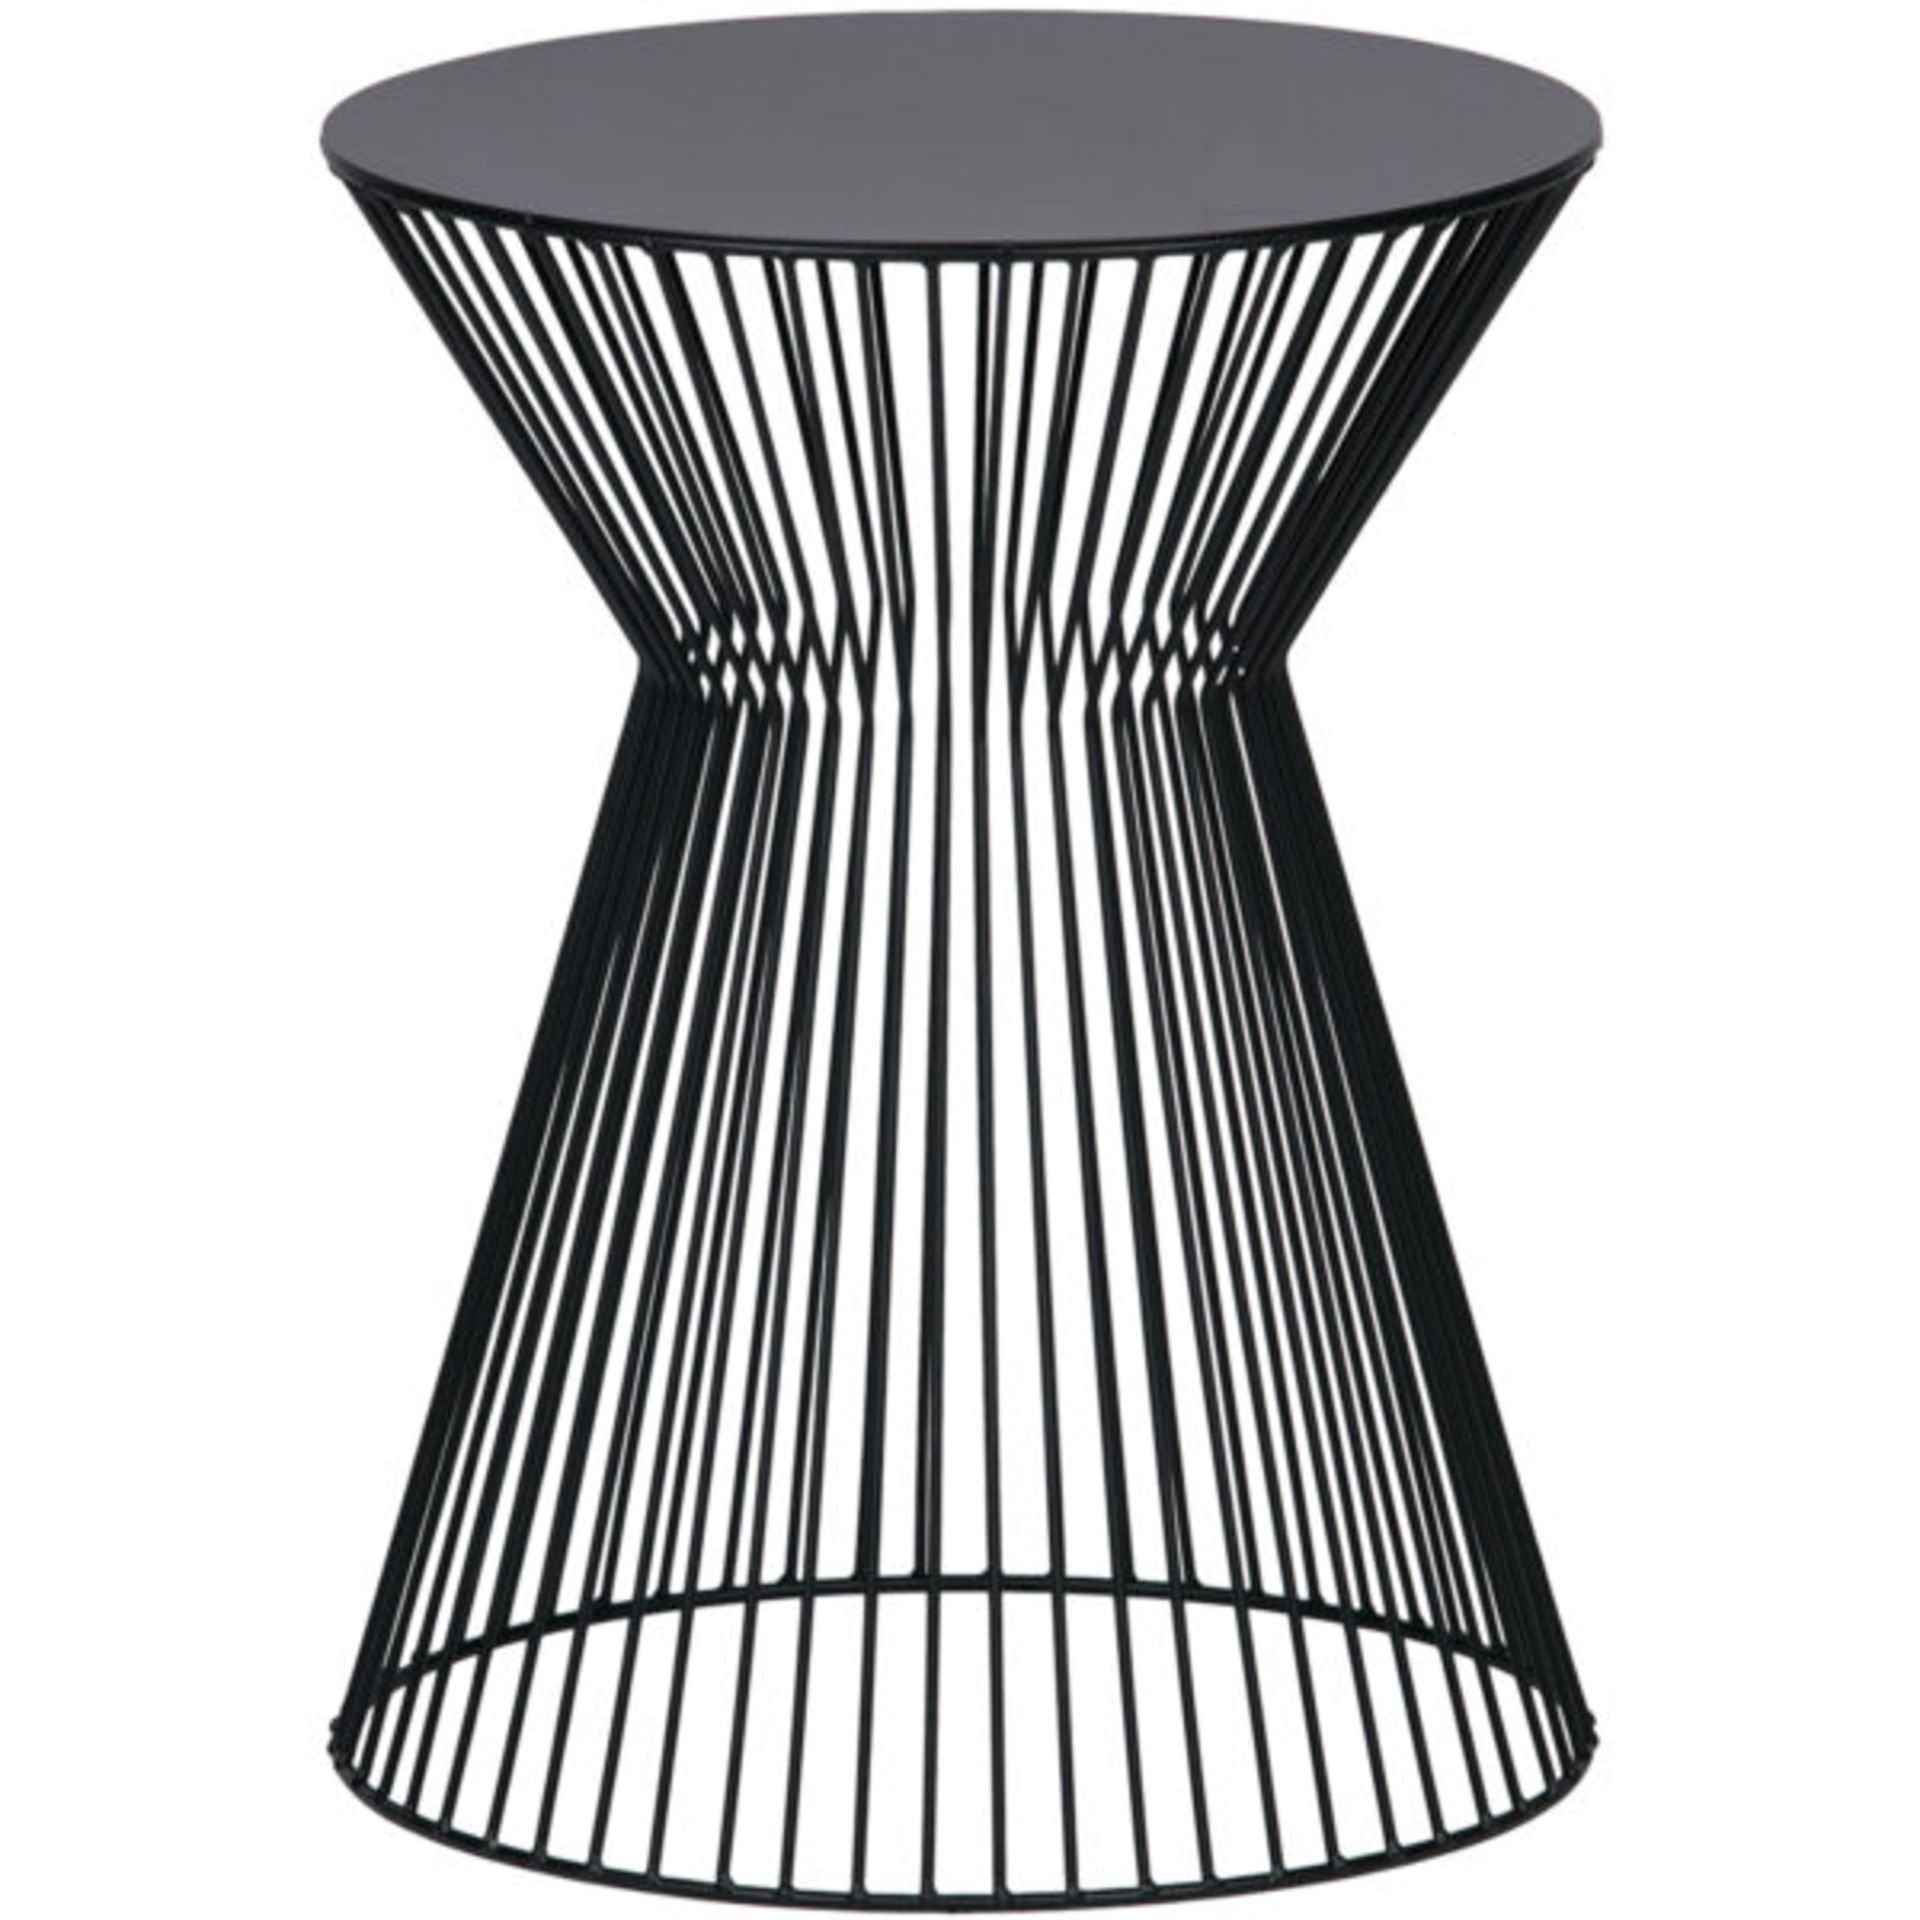 1 x 'Suus' Contemporary Diabalo Style Openwork Metal SIDE Table In Black - Dimensions: 35 × 35 × H46 - Image 2 of 3